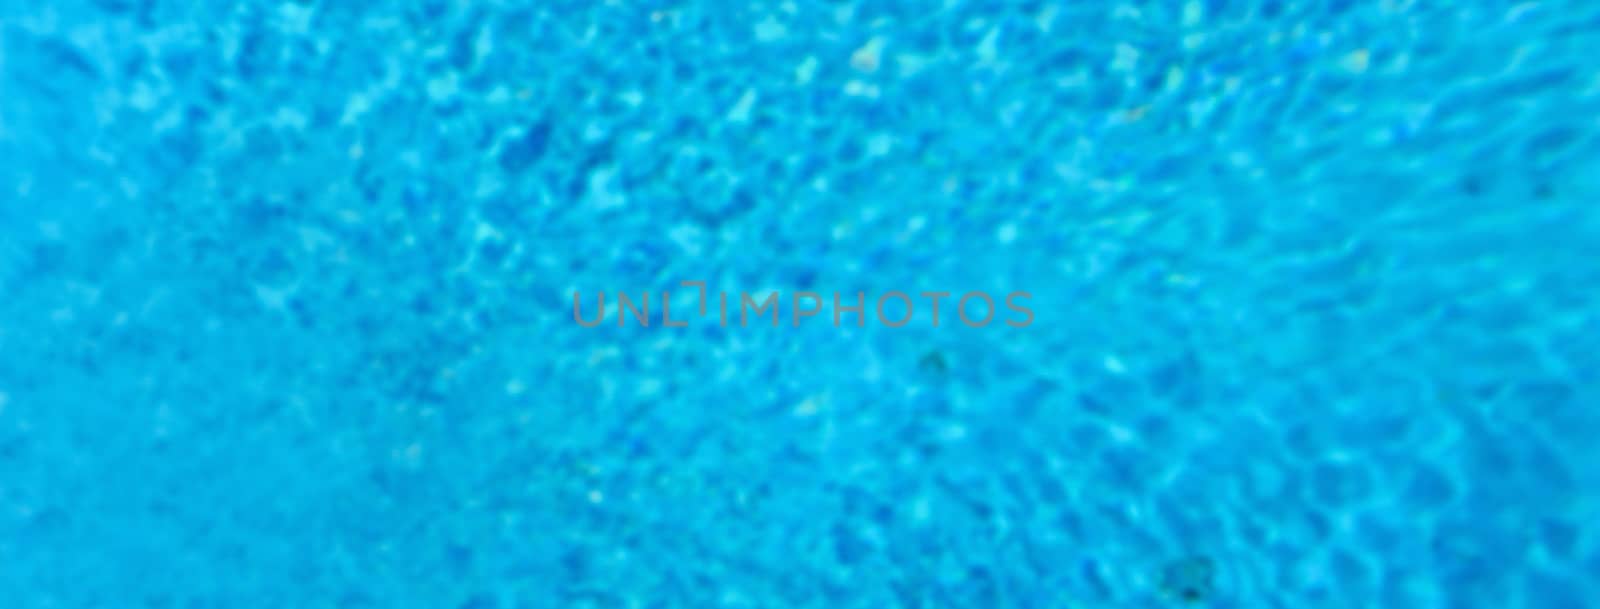 Defocused background with blue water surface of a swimming pool by marcorubino